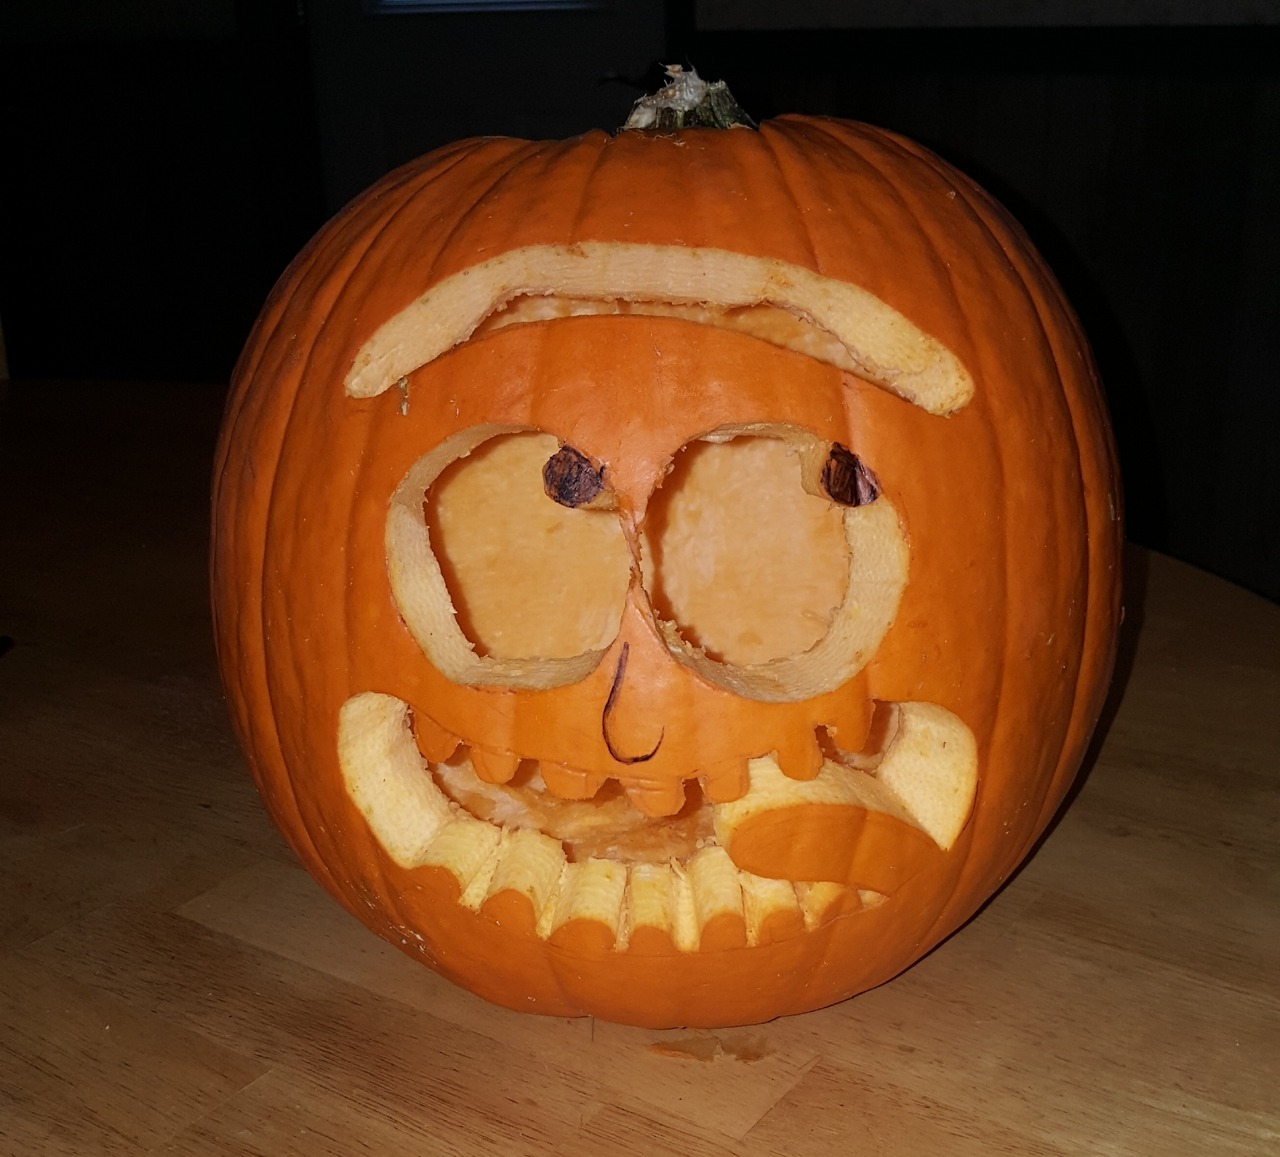 Miscellaneous Matters — “I’ve turned myself into a pumpkin, Morty! I’m...